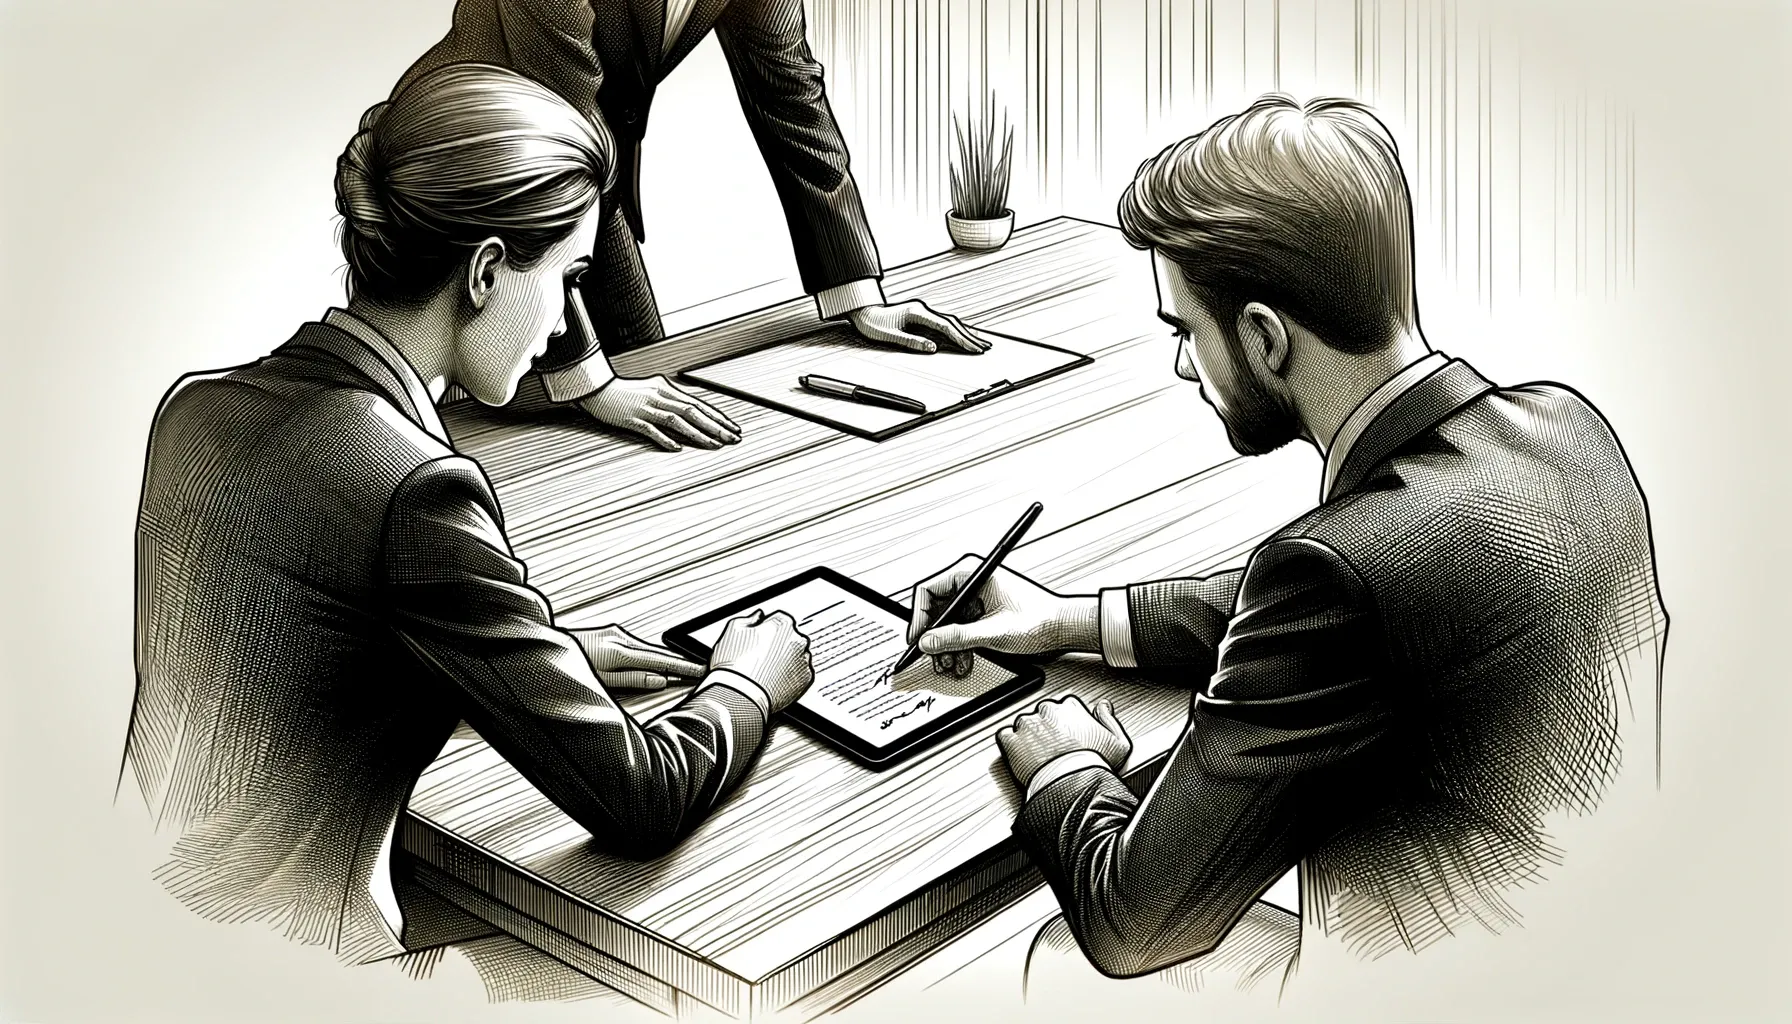 A sketch-style illustration of two professionals at a business meeting, signing a contract on a tablet.